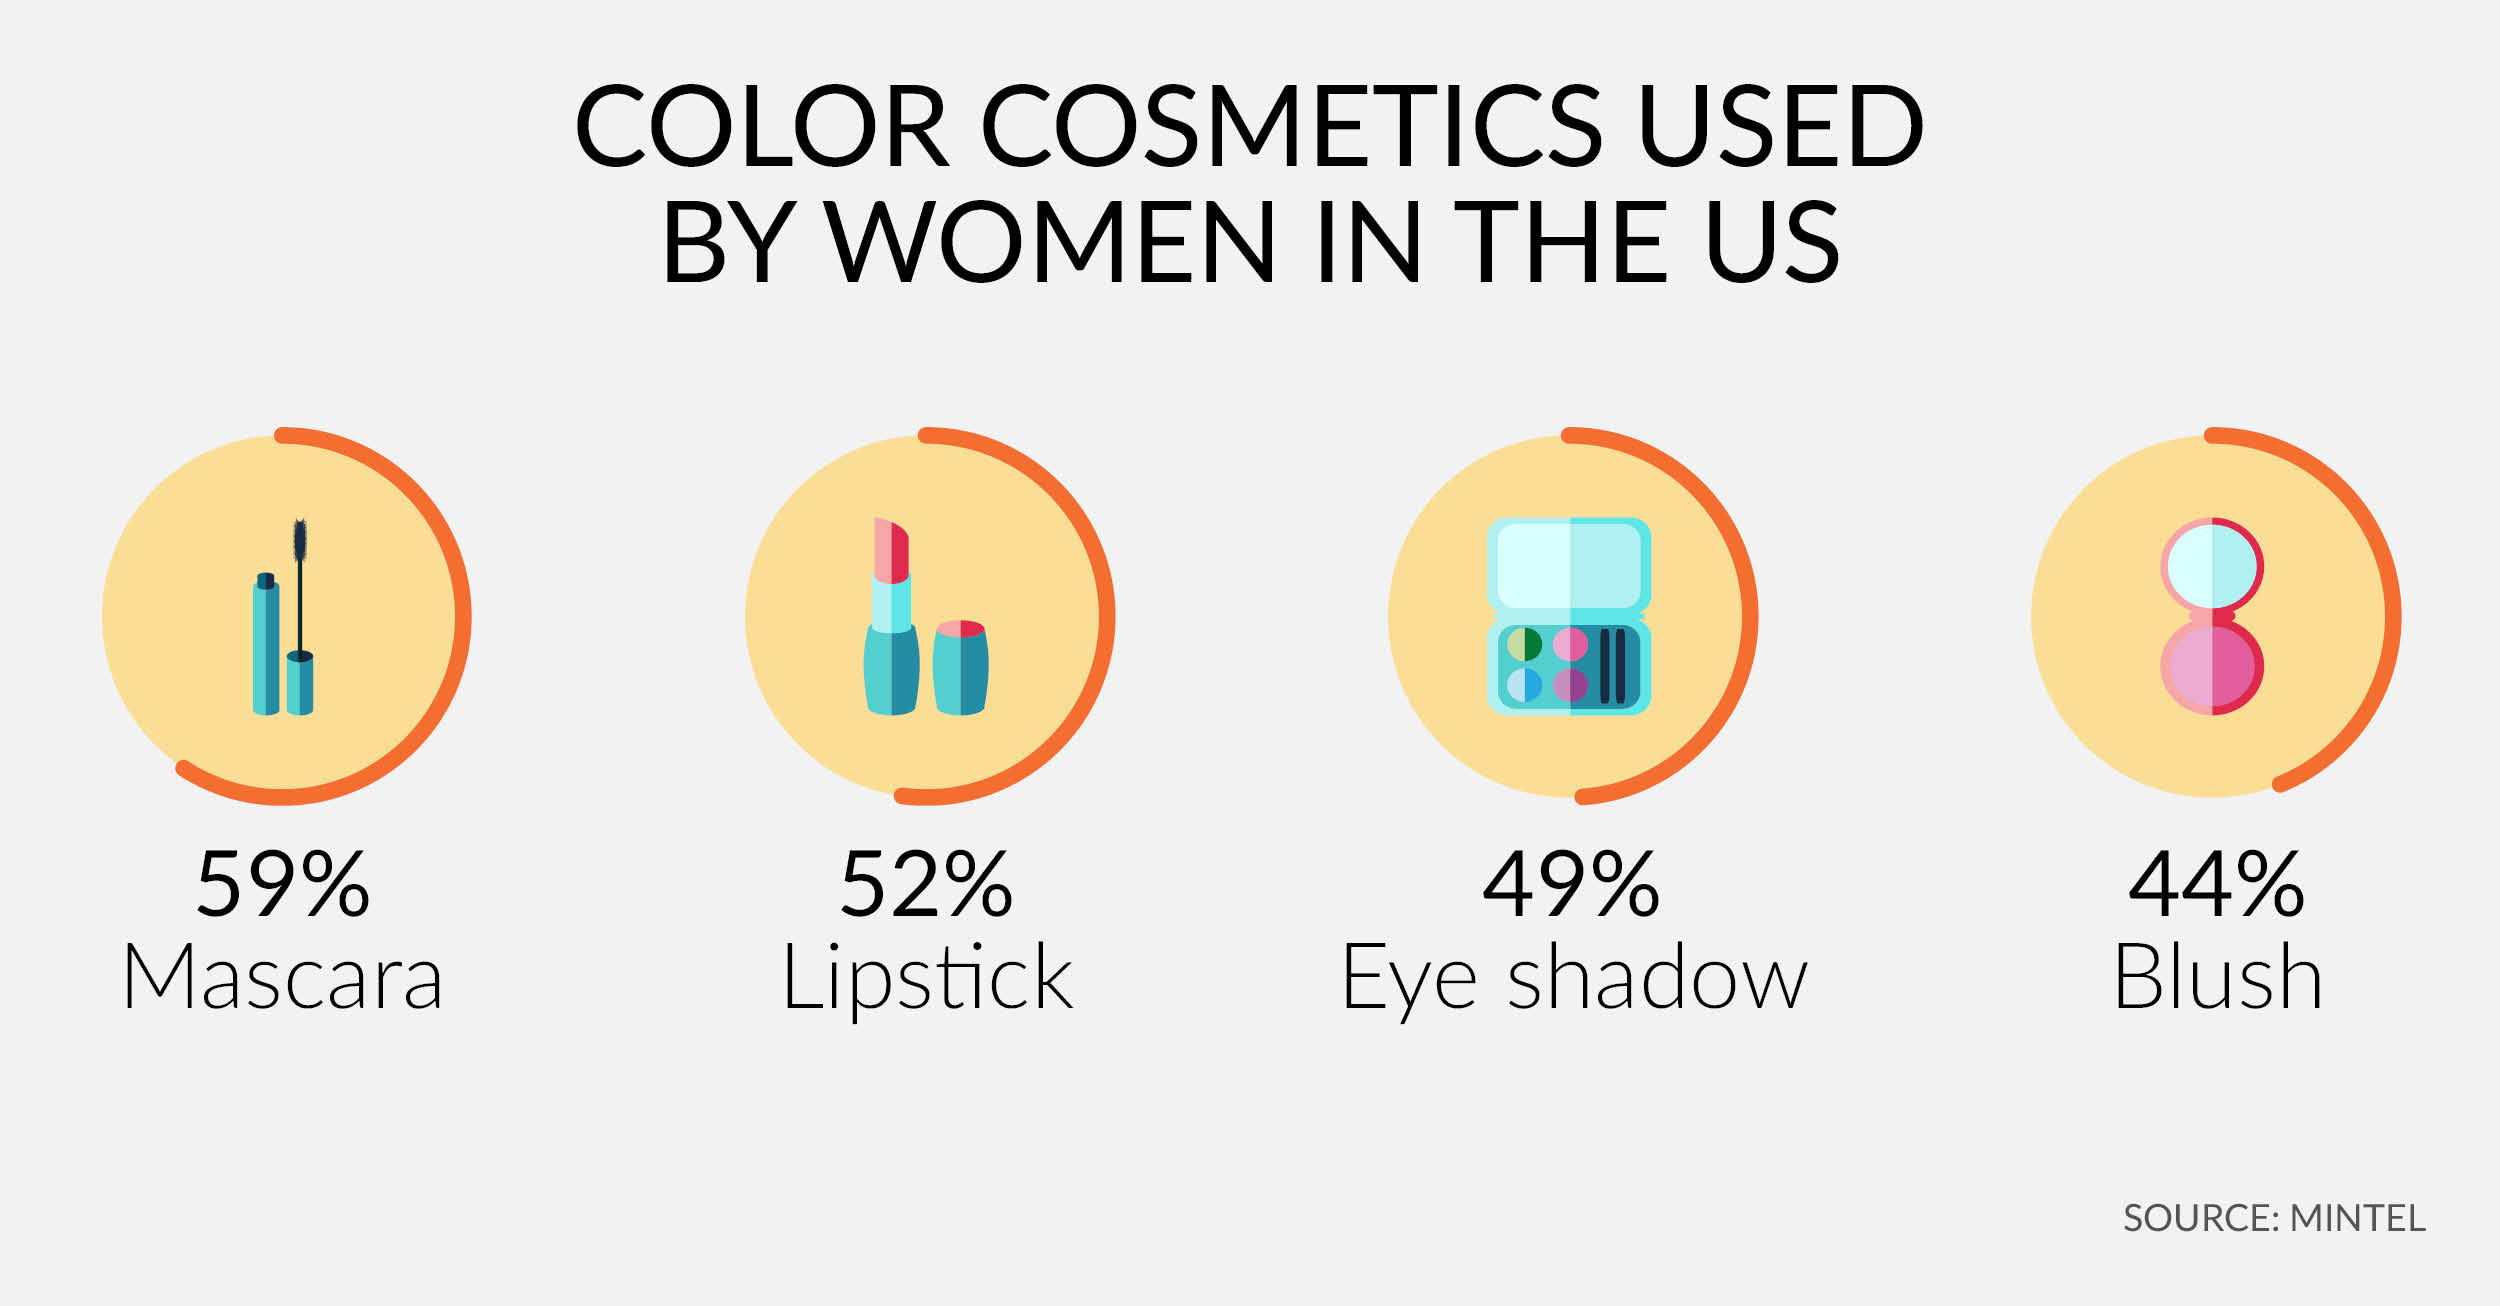 Americas - Color cosmetics usage in the US - LinkedIN